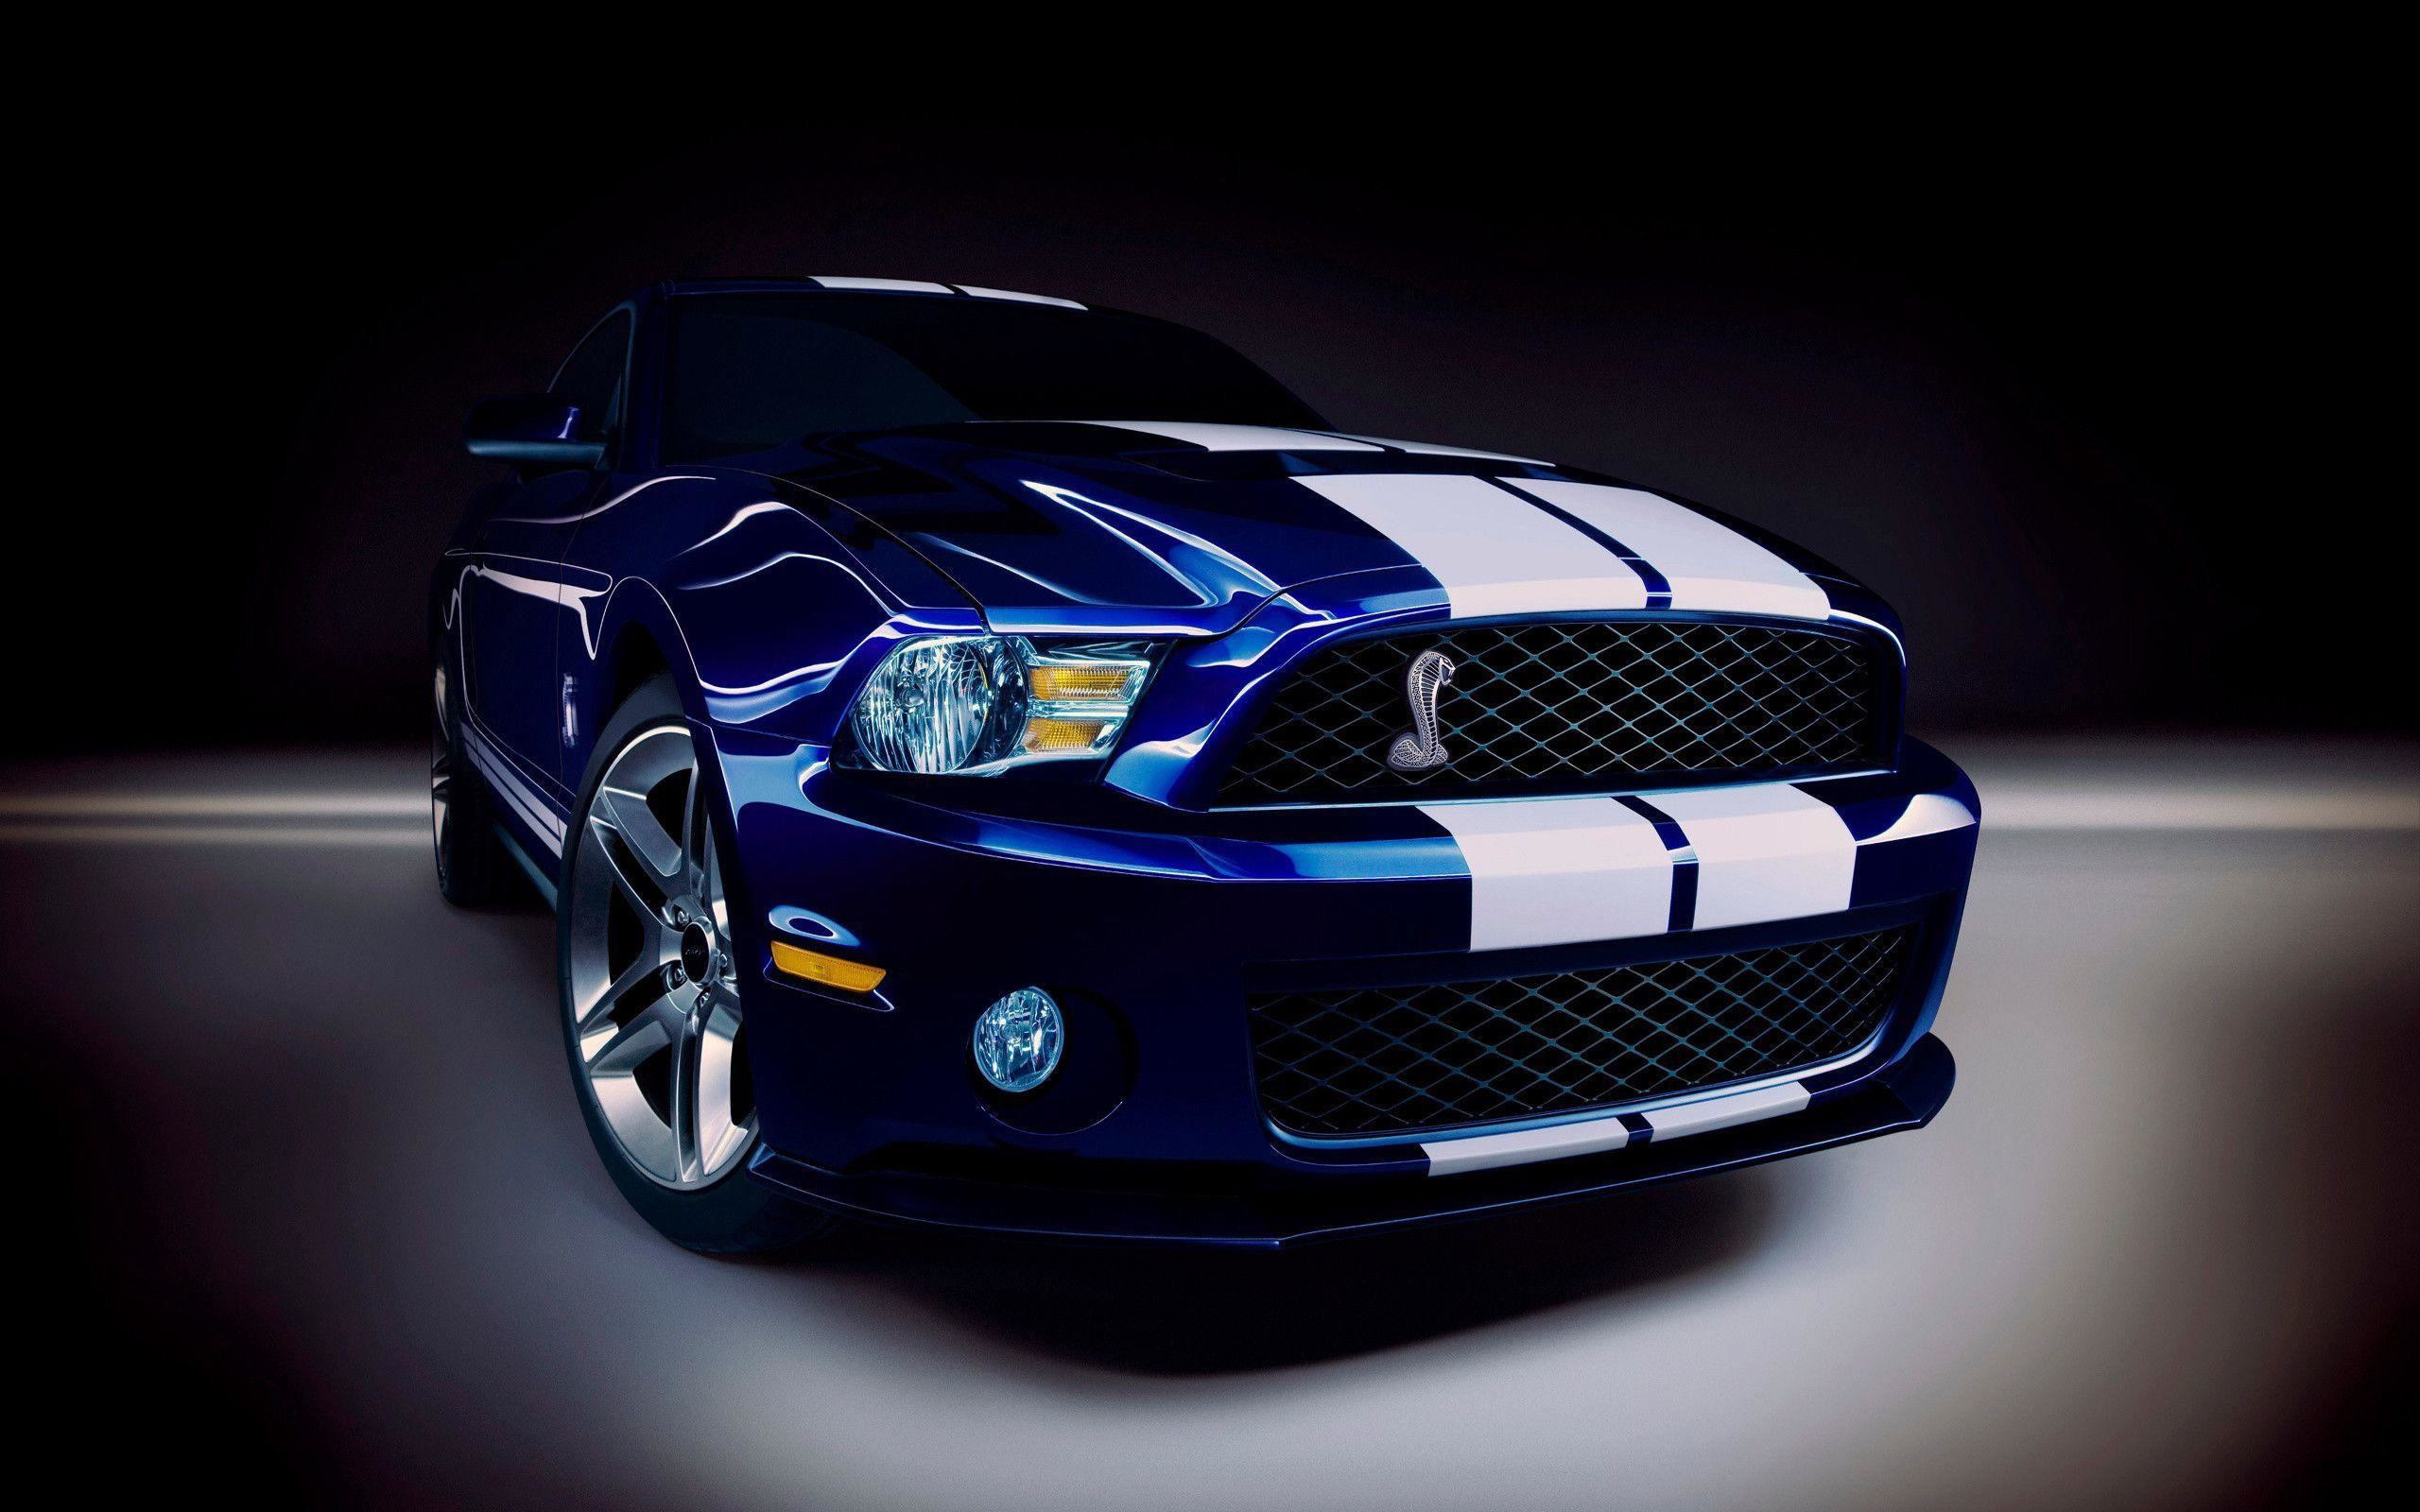 2560x1600 Cool Ford Mustang Muscle Car Wallpapers - imageswall.com